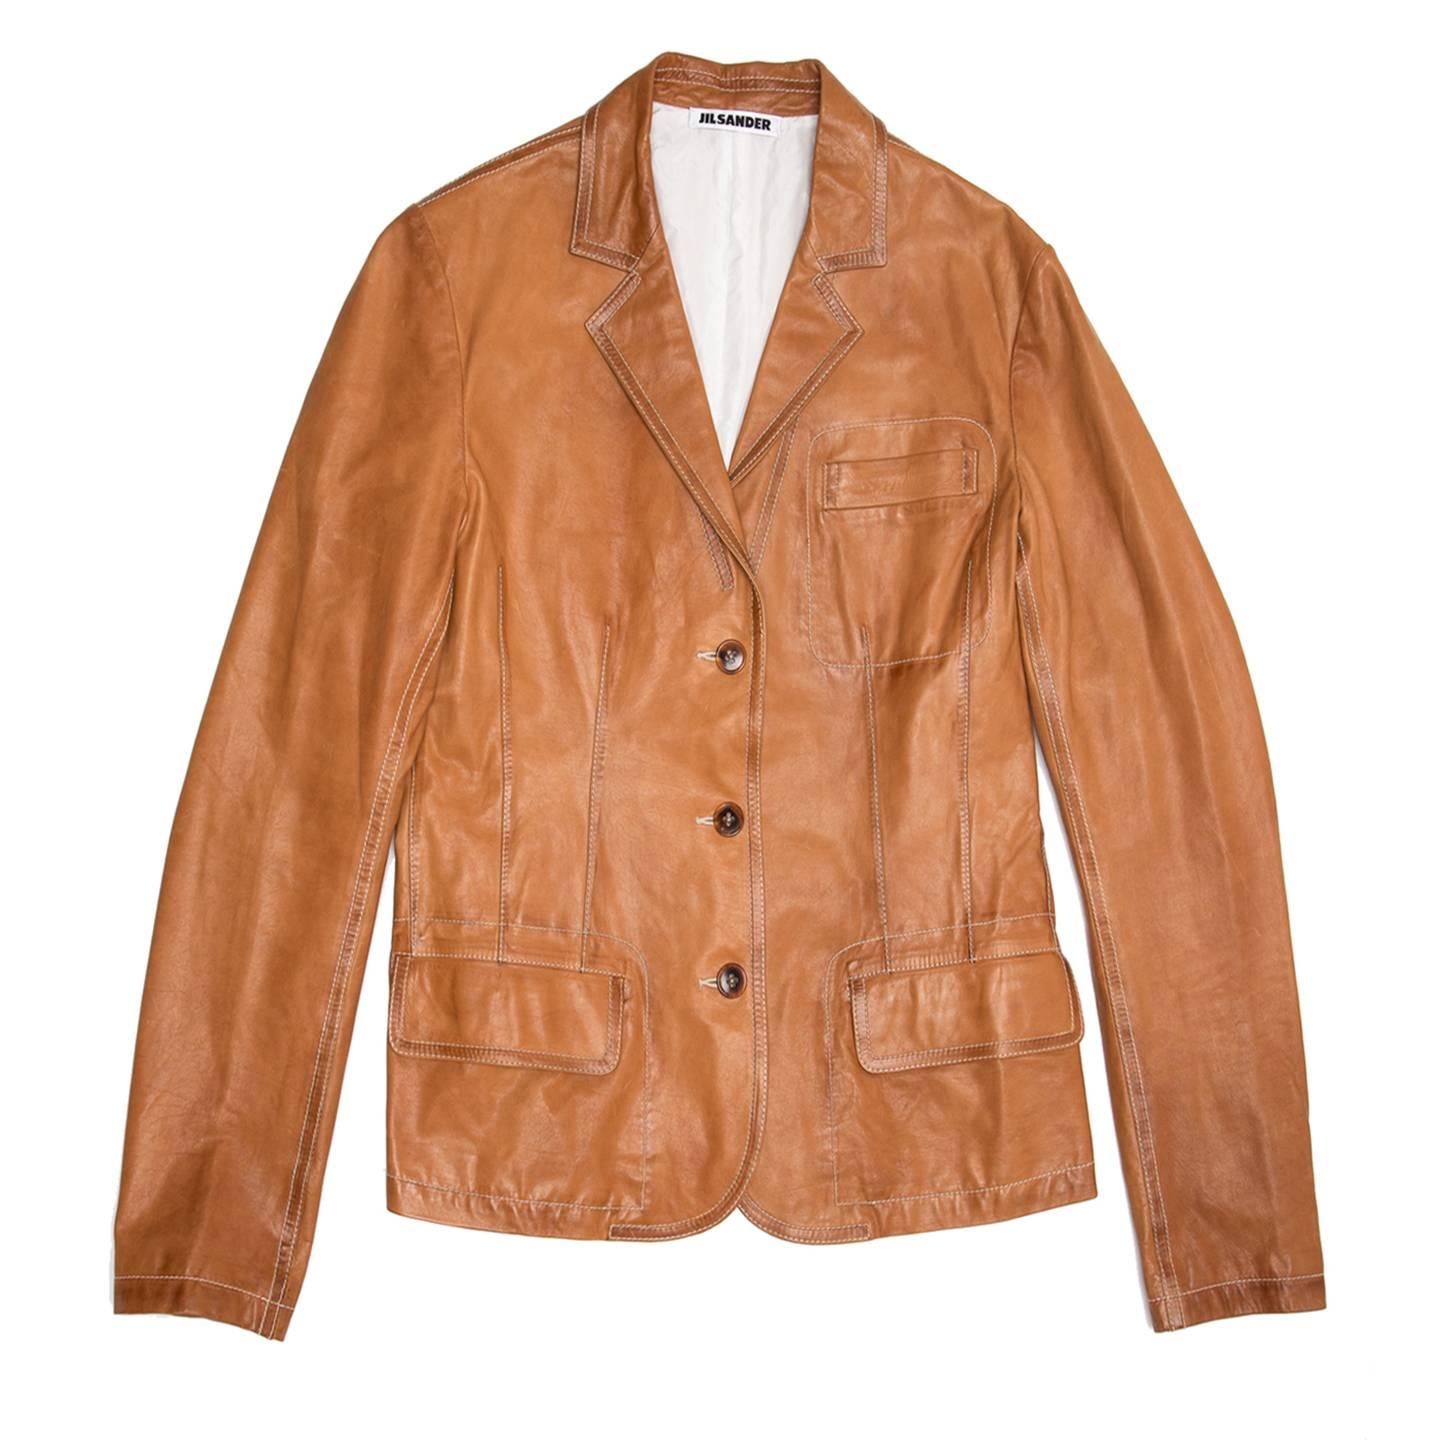 Tan brown leather short jacket with a 3 button closure and small lapel. All the seams and profiles are decorated with ivory color top stitches to match the silk lining. The front is further embellished by a breast pocket and two flap pockets, also